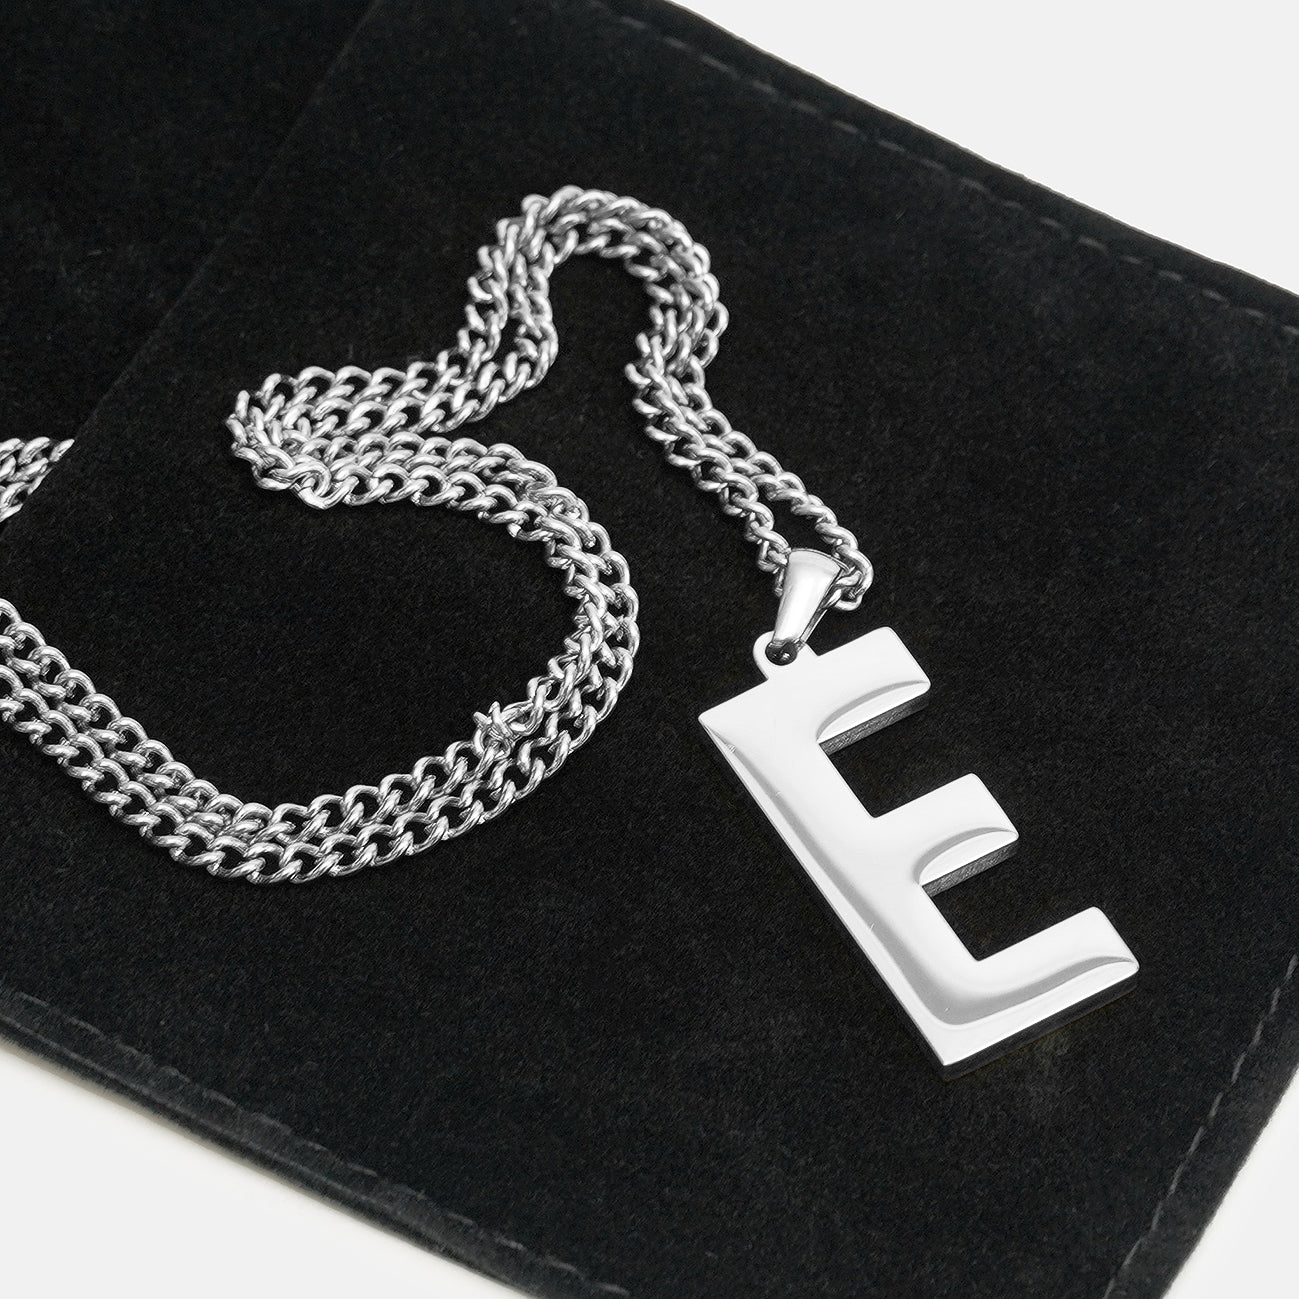 E Letter Pendant with Chain Necklace - Stainless Steel